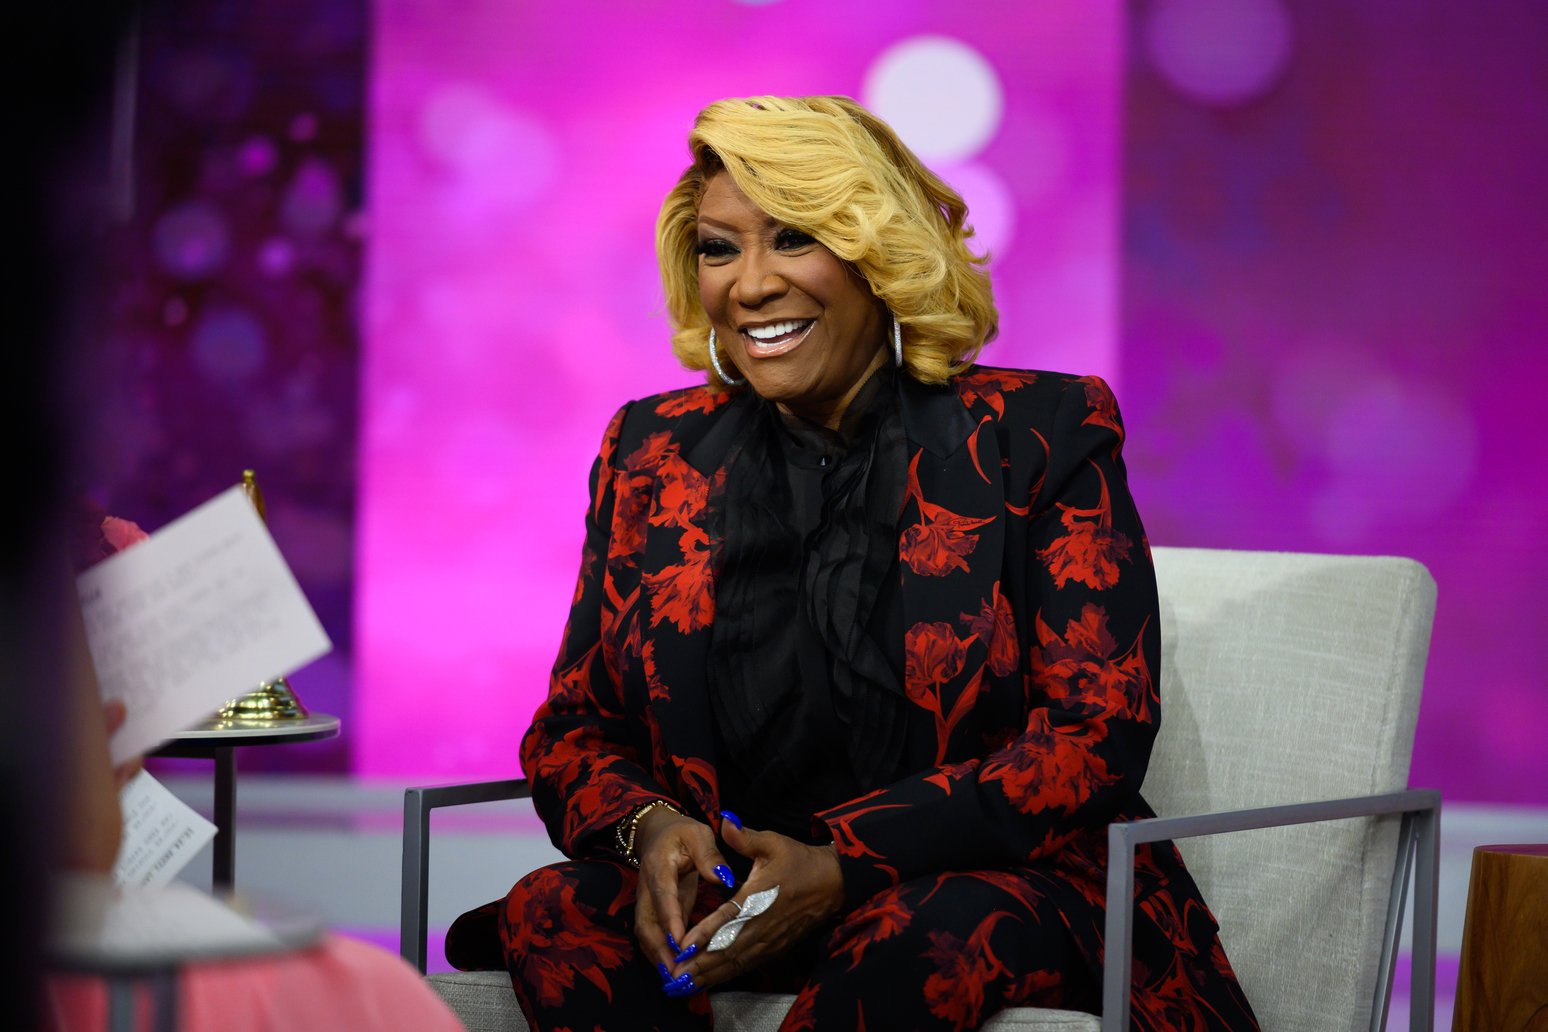 Patti LaBelle on "TODAY" Tuesday, October 29, 2019 | Photo: GettyImages